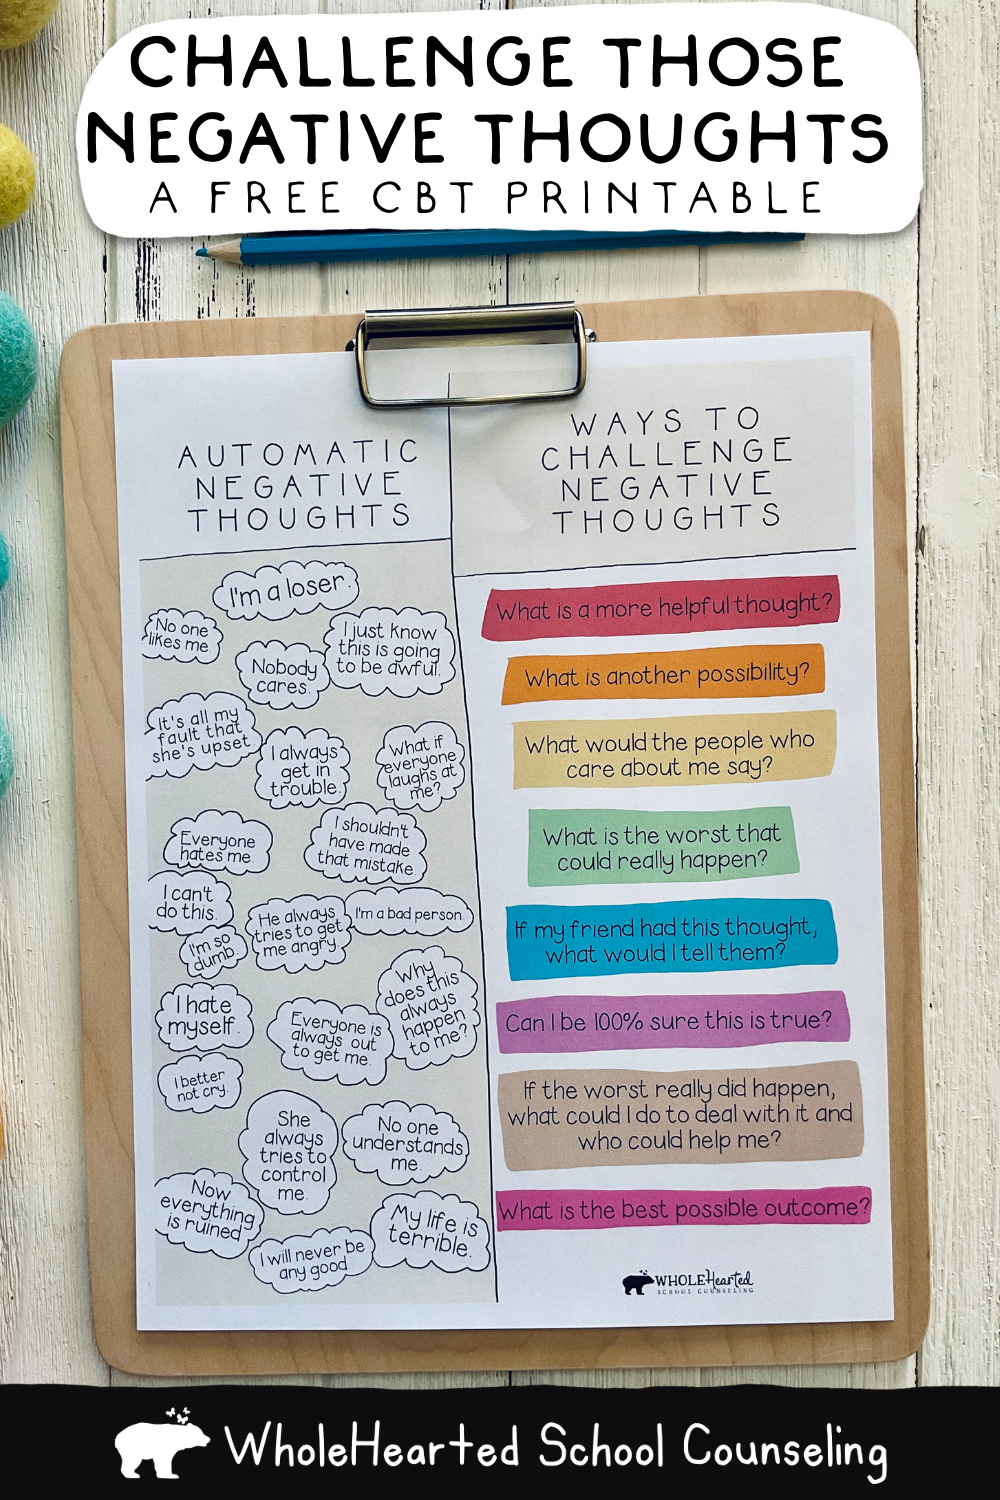 Clipboard with Challenge Negative Thoughts infographic and colored pencils.